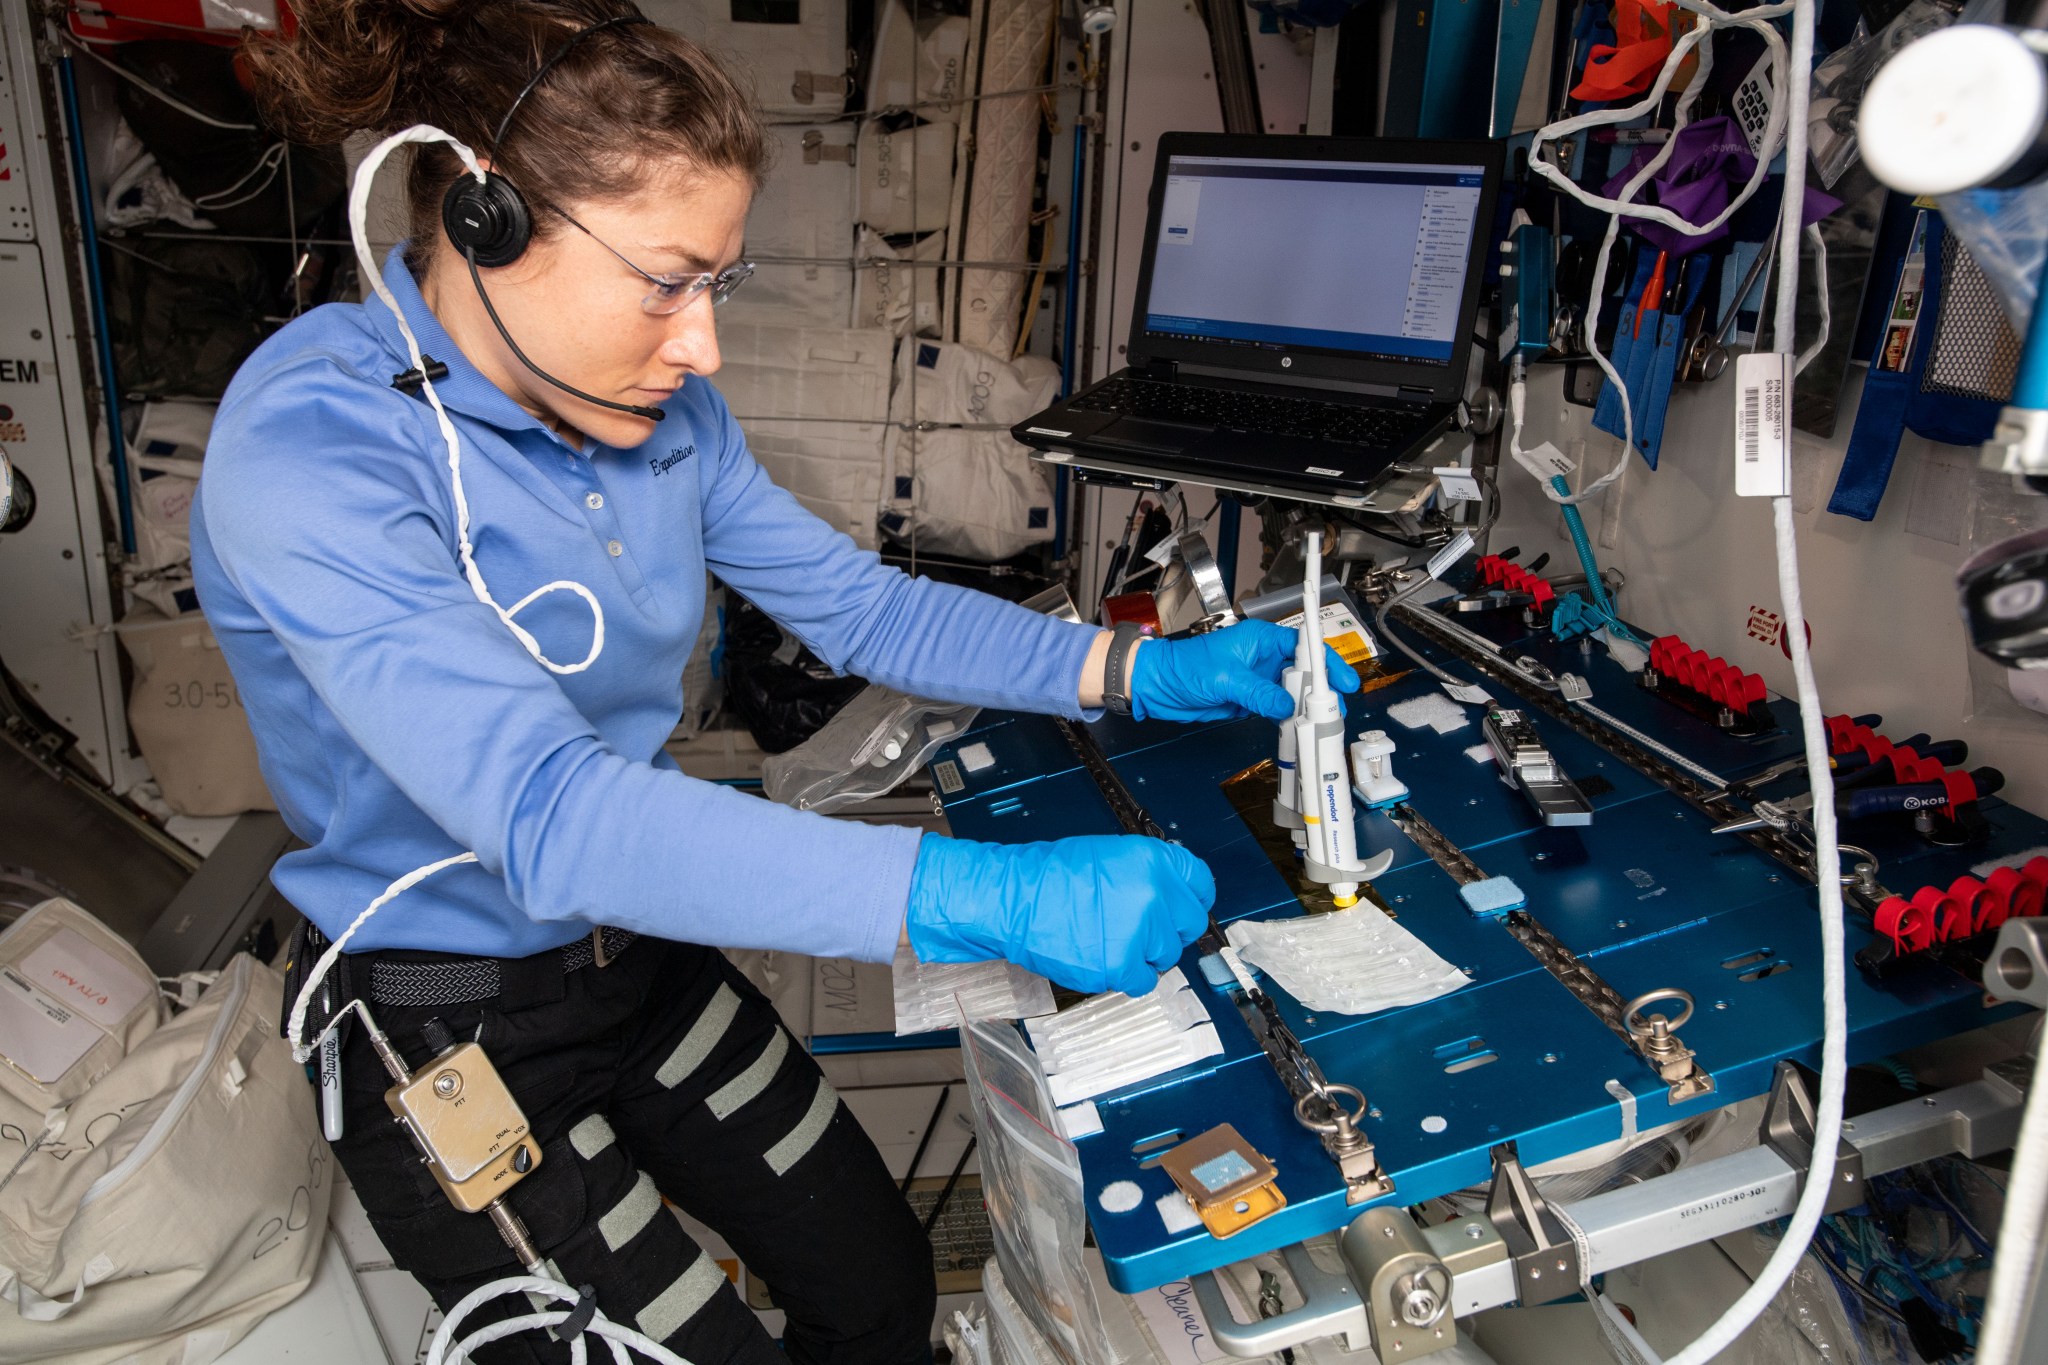 image of astronaut working on investigation